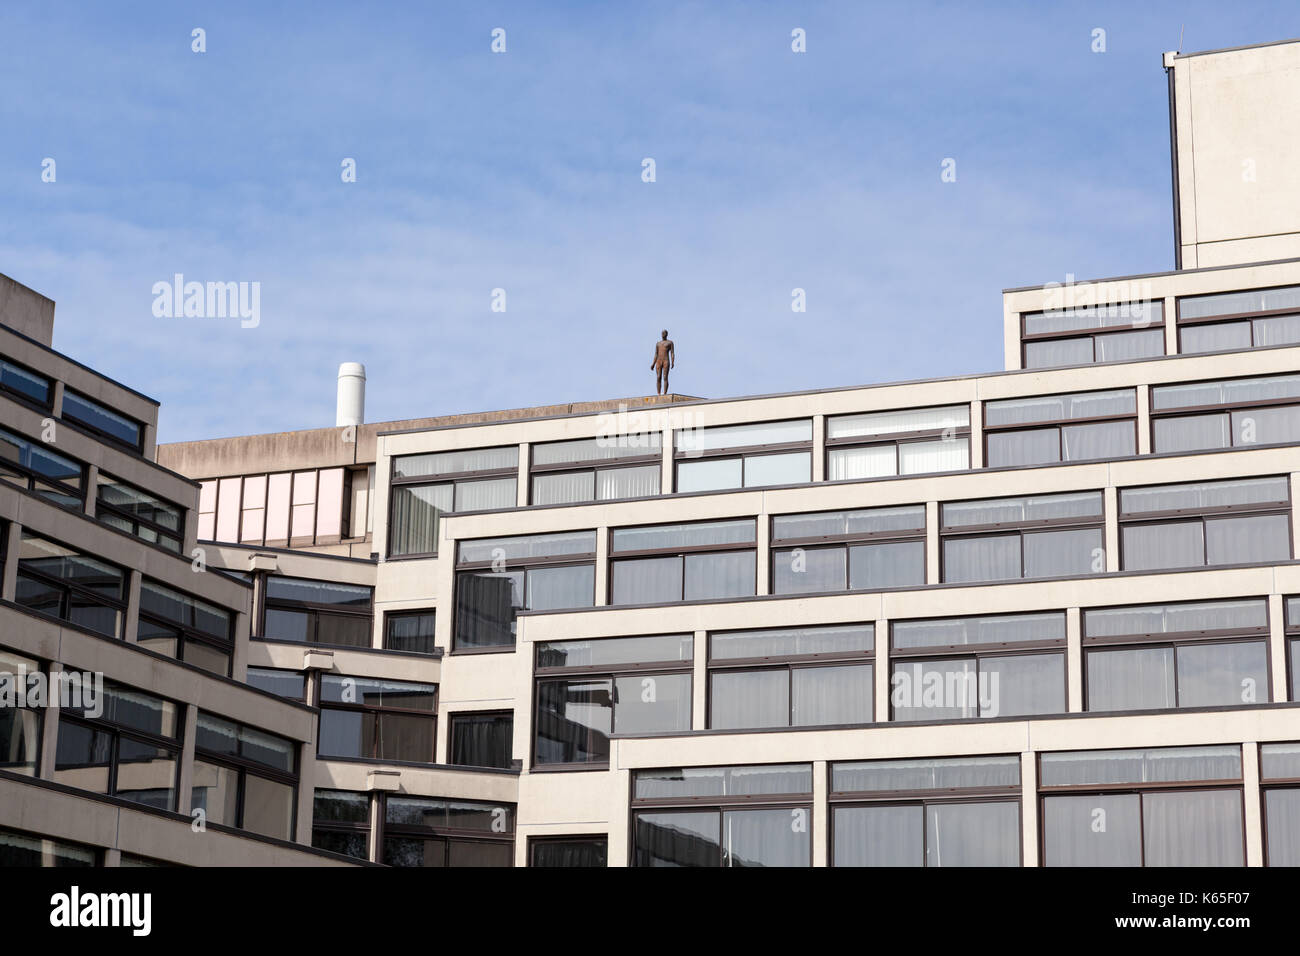 A life-sized cast iron sculpture by Antony Gormley on the roof of the library at the University of East Anglia, Norwich, UK. Stock Photo